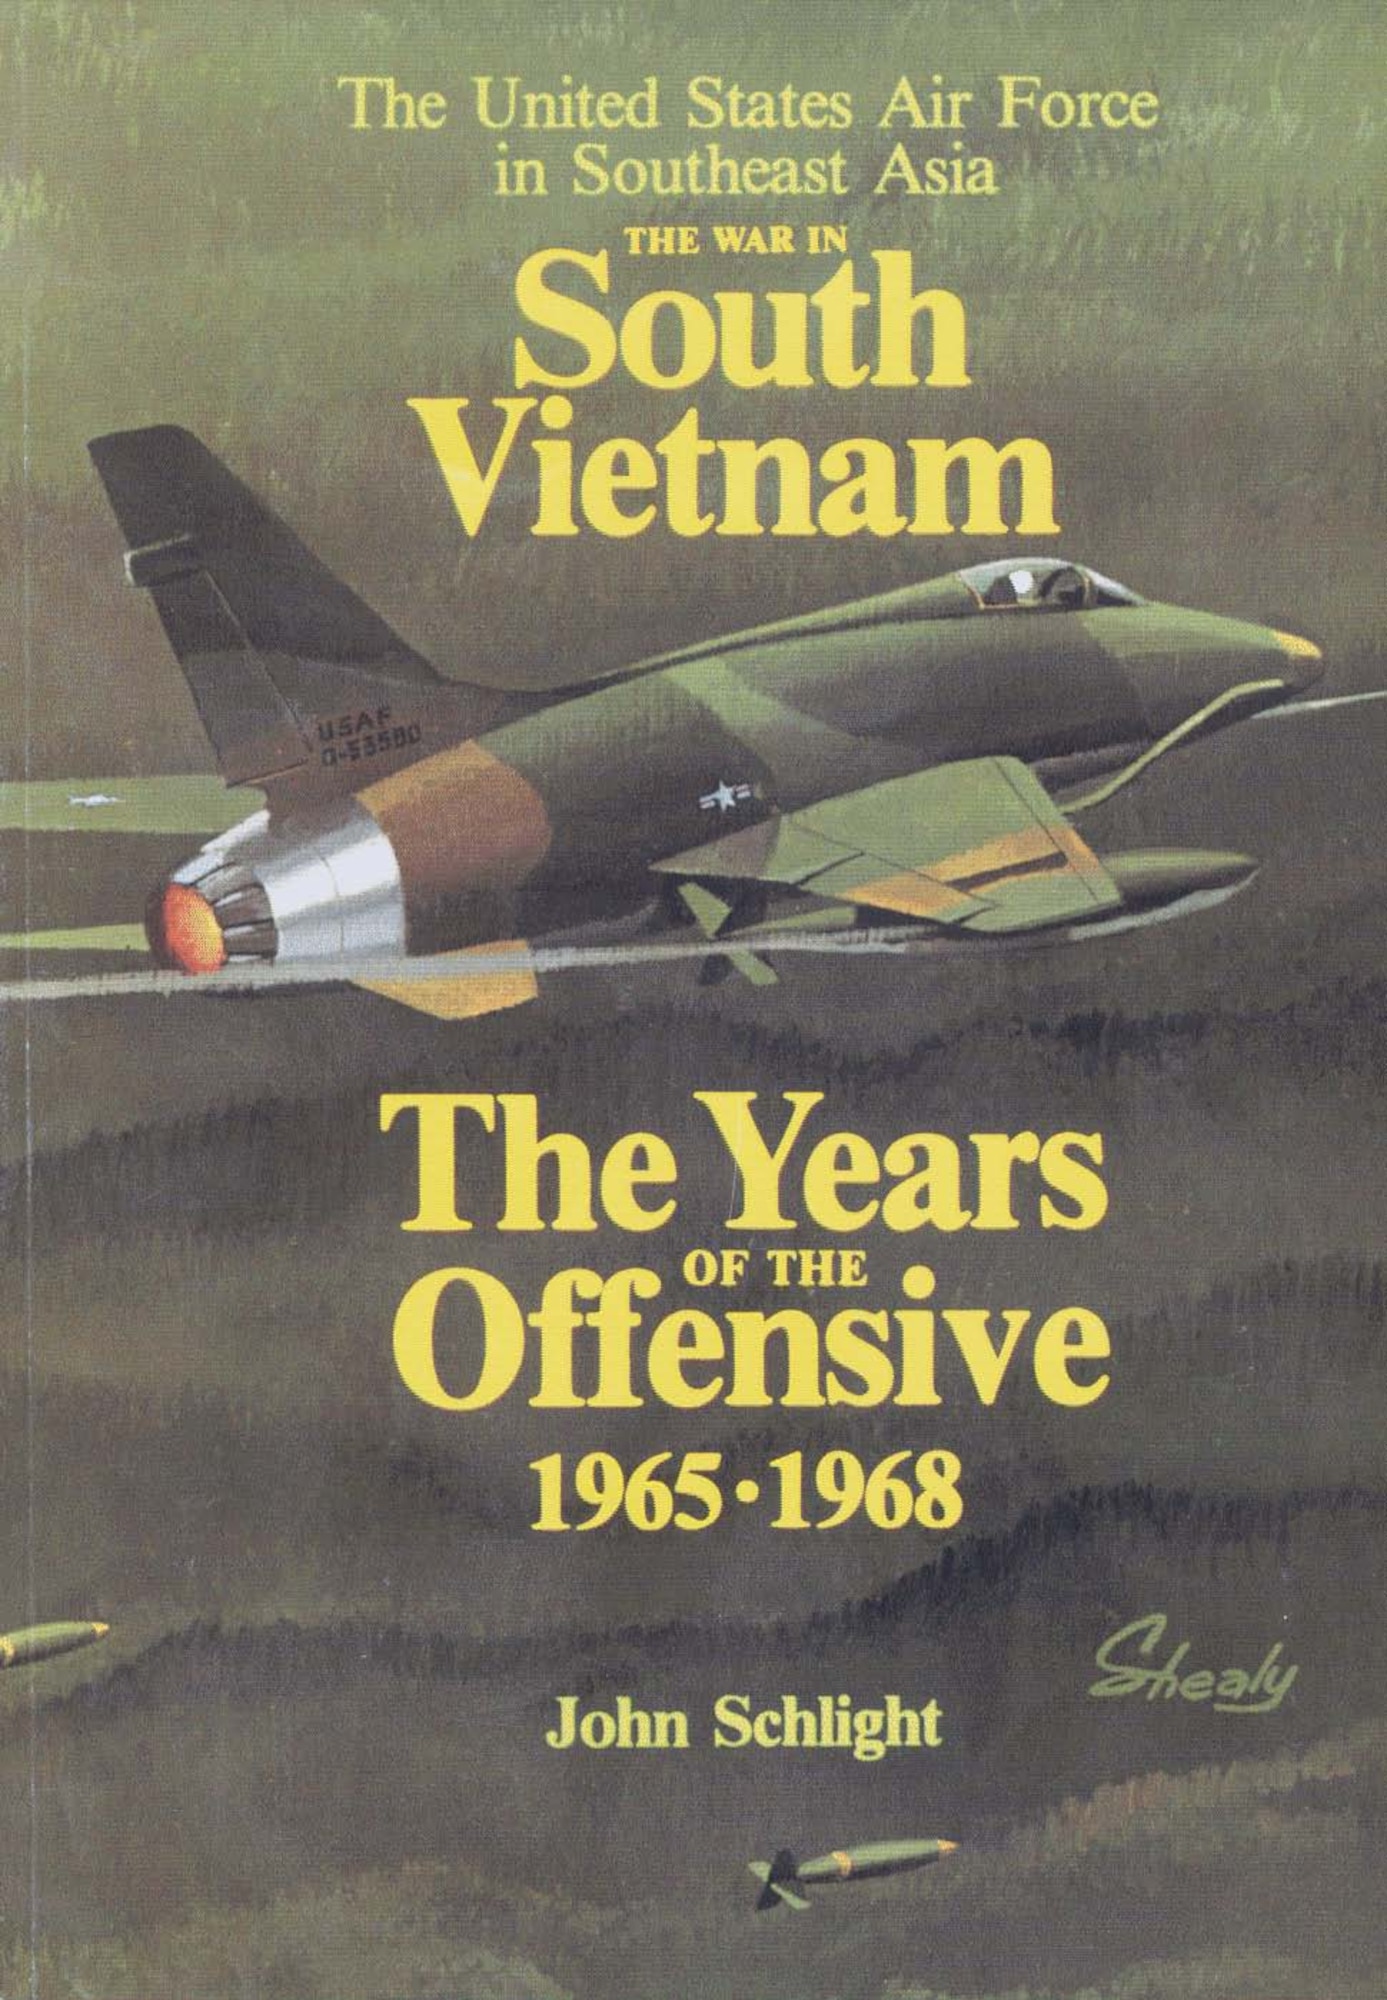 The War in South Vietnam: the Years of the Offensive, 1965-1968 by John Schlight